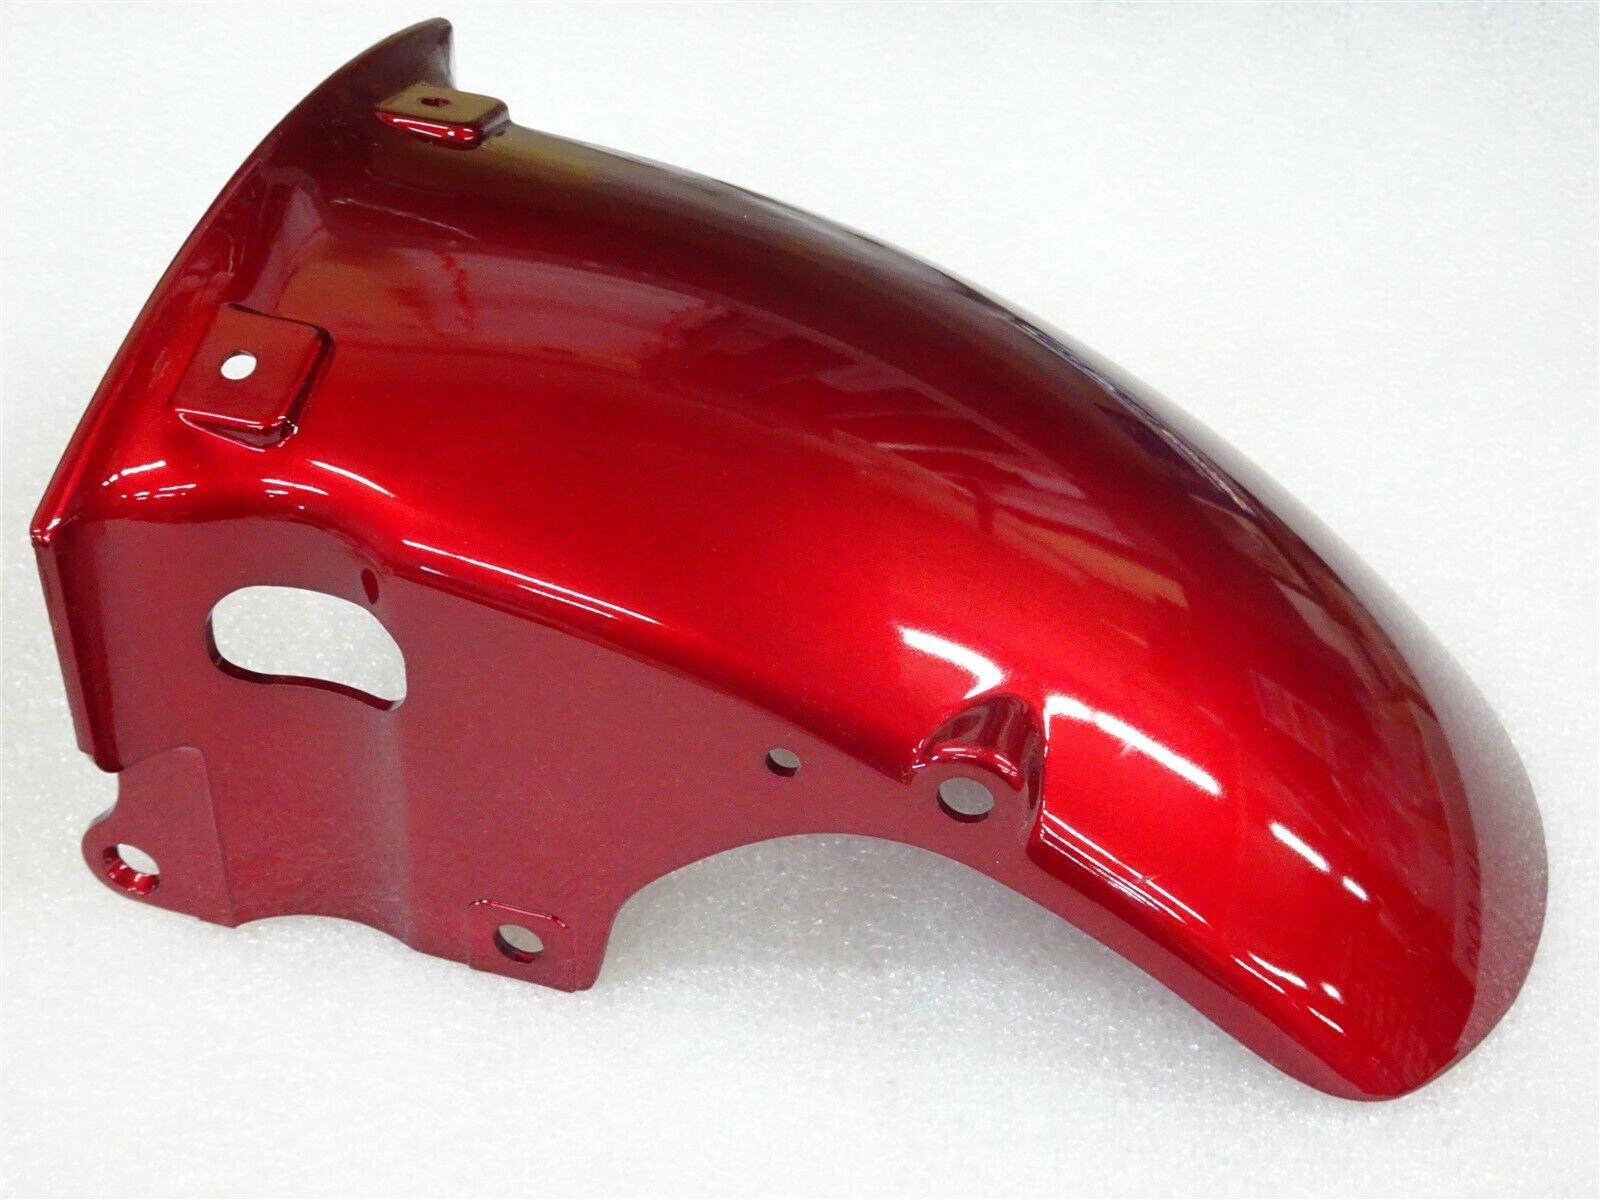 Kawasaki NOS NEW 35004-1321-H3 Candy Wine Red Front Fender ZX ZX900 Ninja  ZX-9R